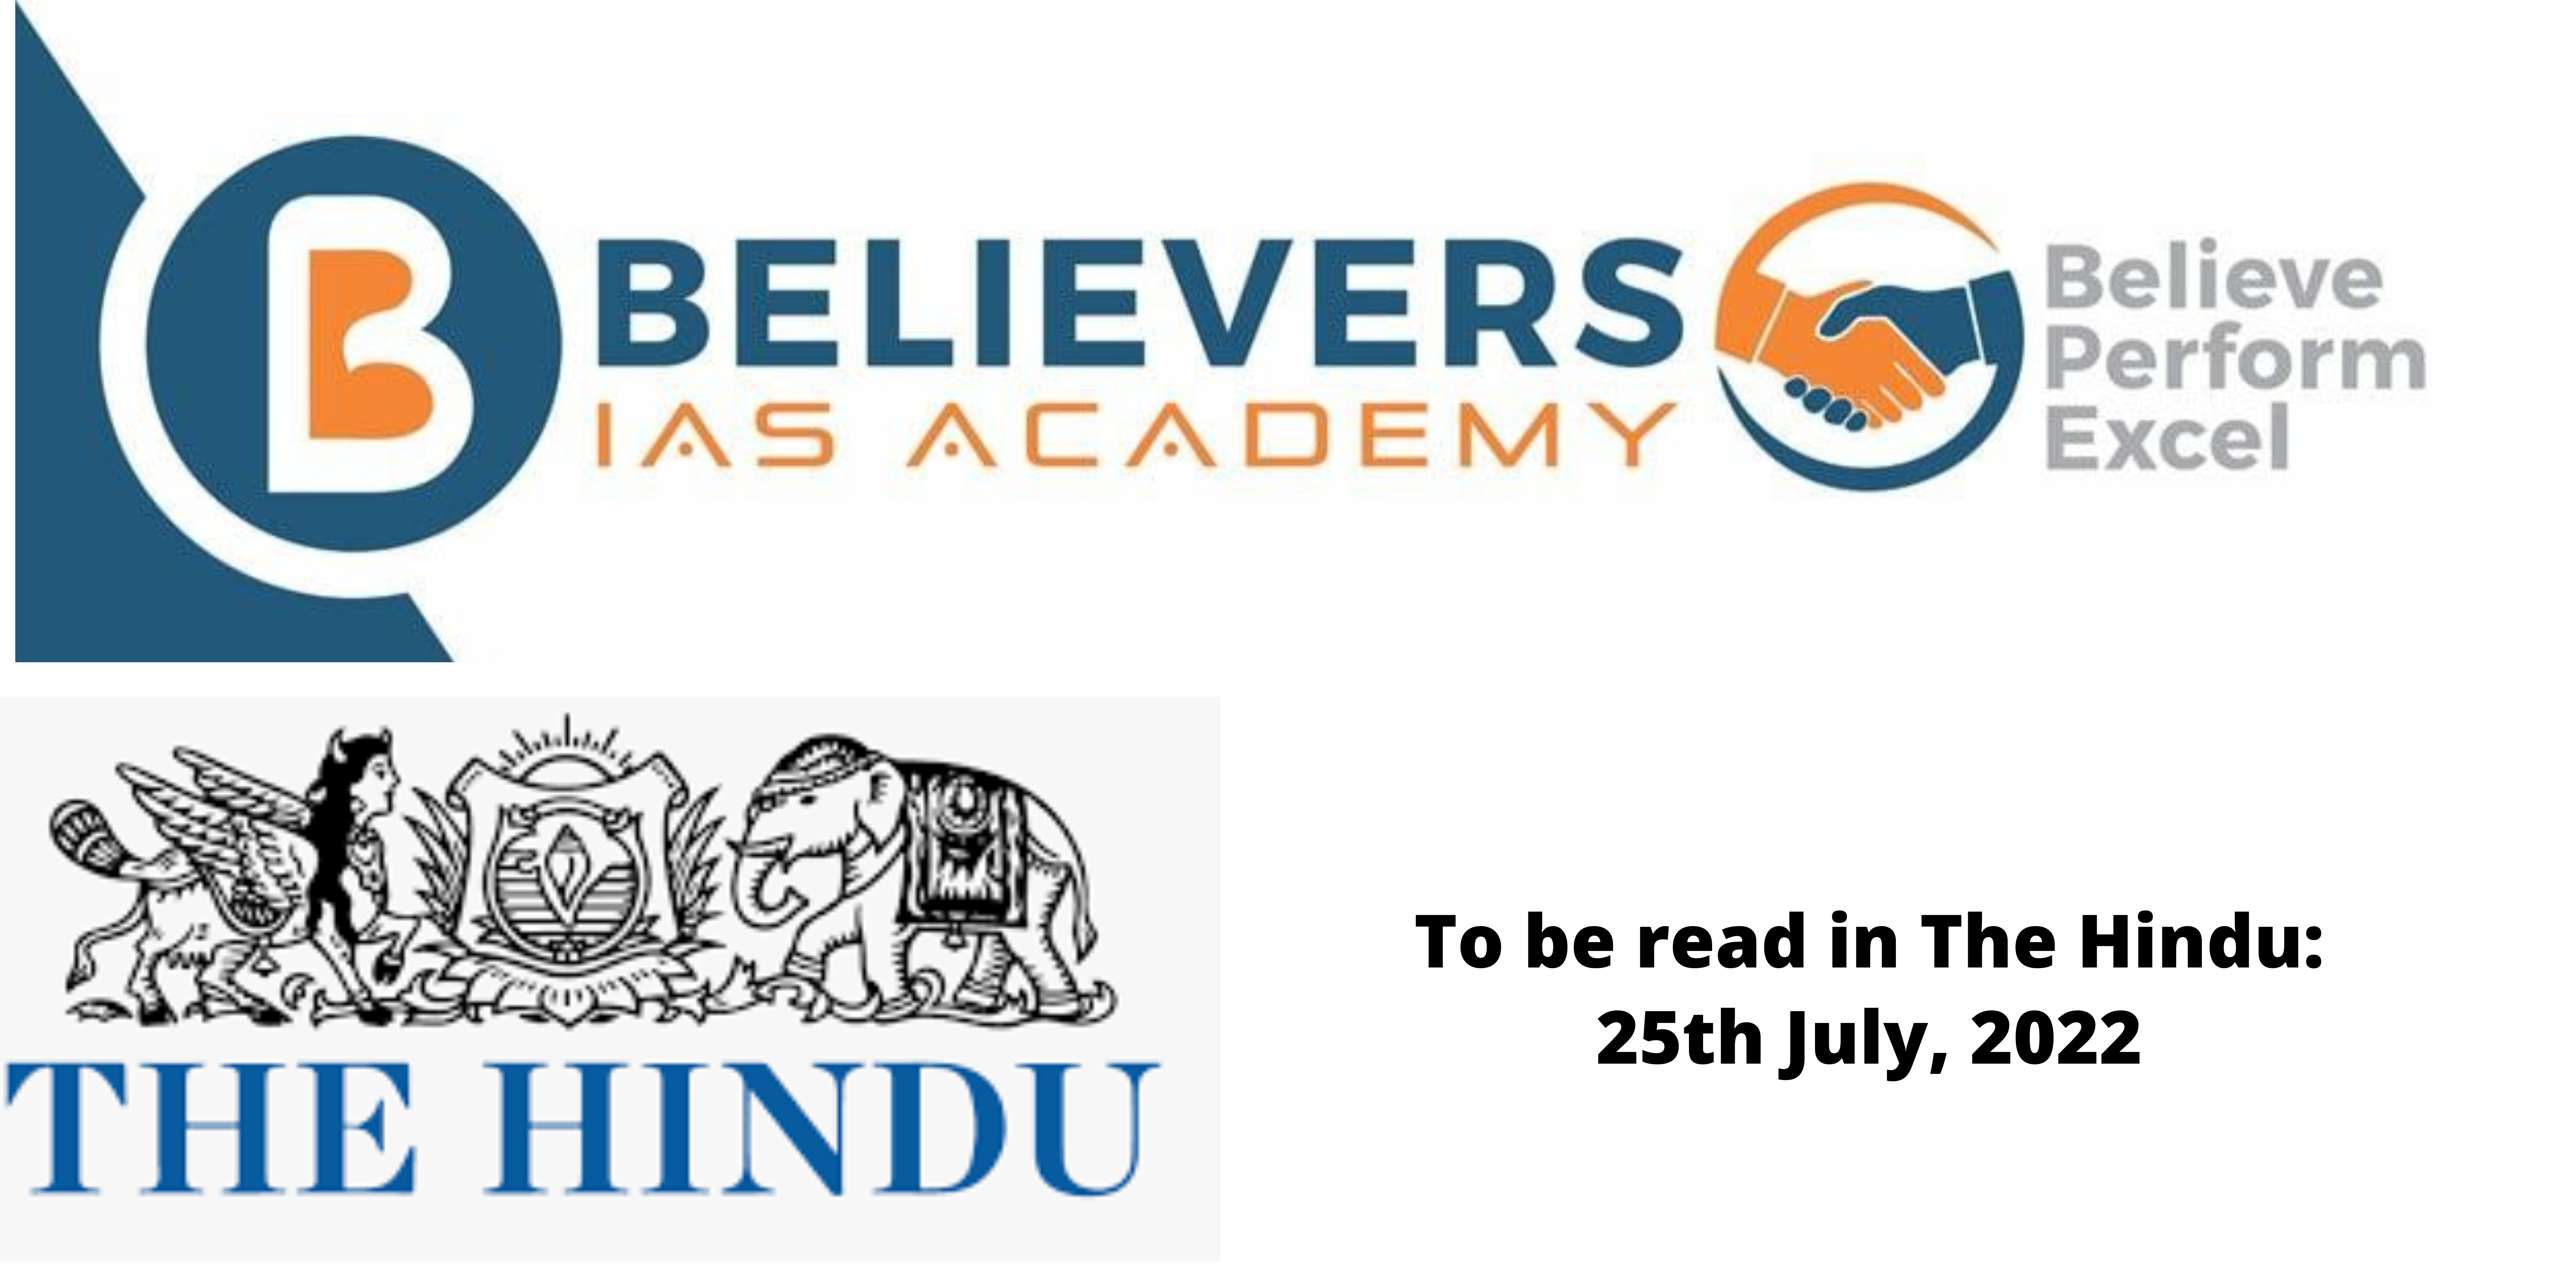 News articles for IAS Exam preparation - 25th July, 2022